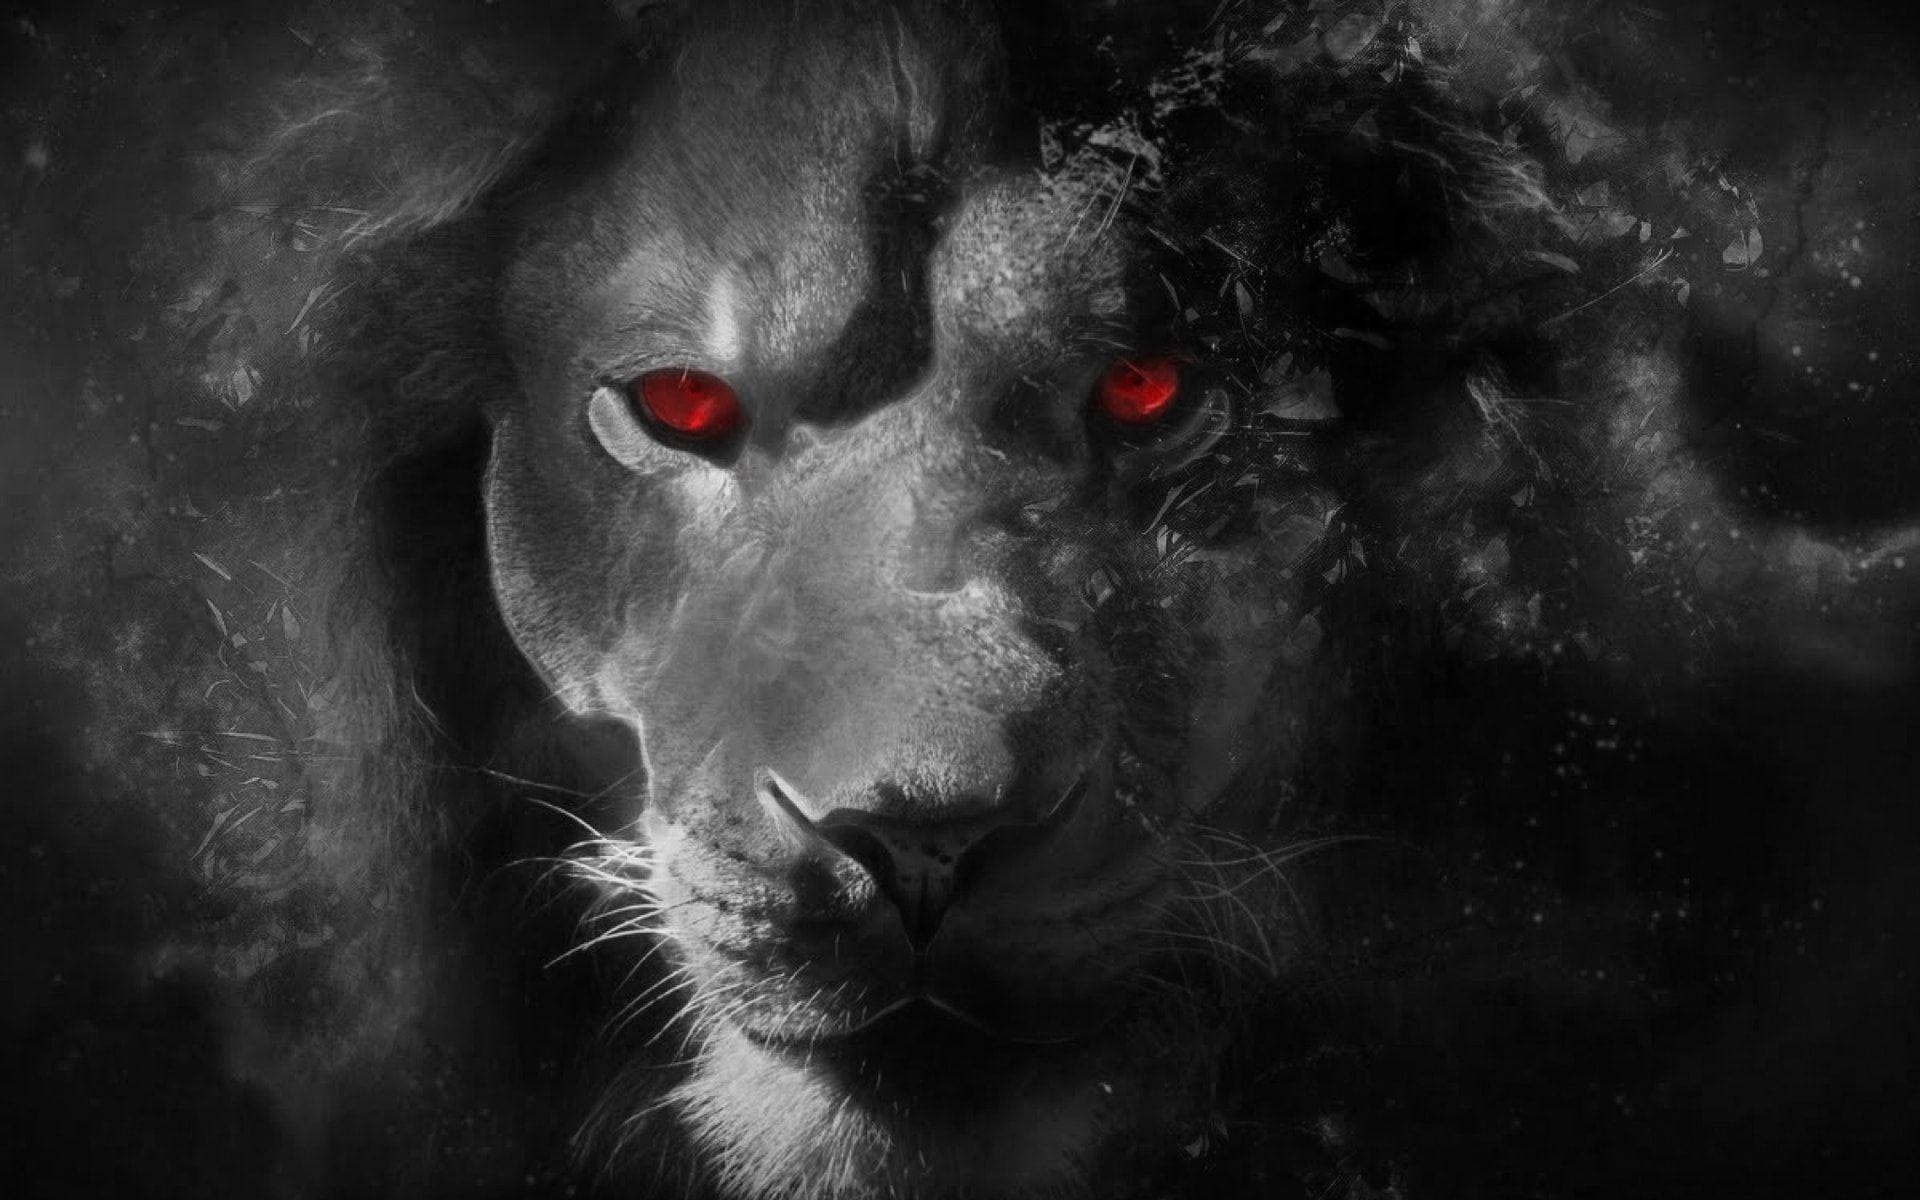 Monochrome Lion Red Eyes Artwork Wallpaper And Free Stock